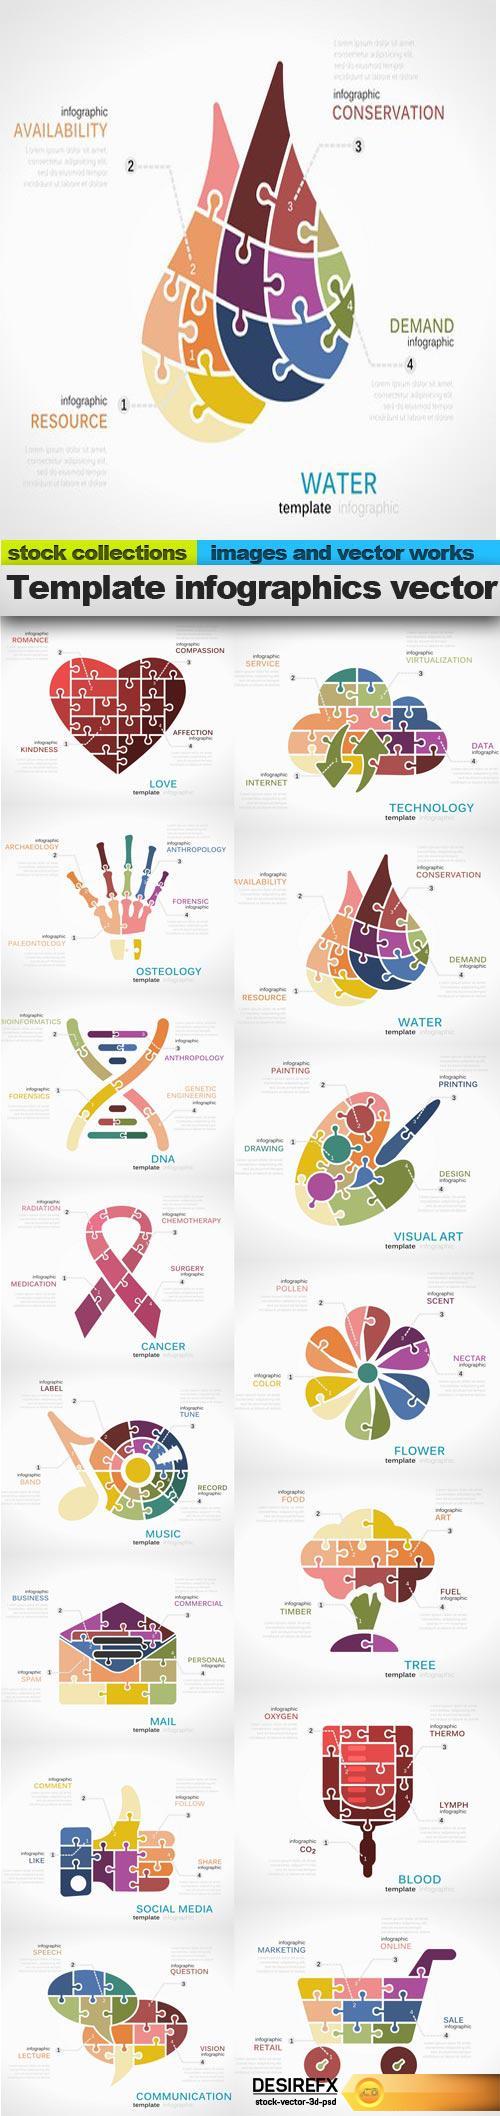 Template infographics vector, 15 x EPS